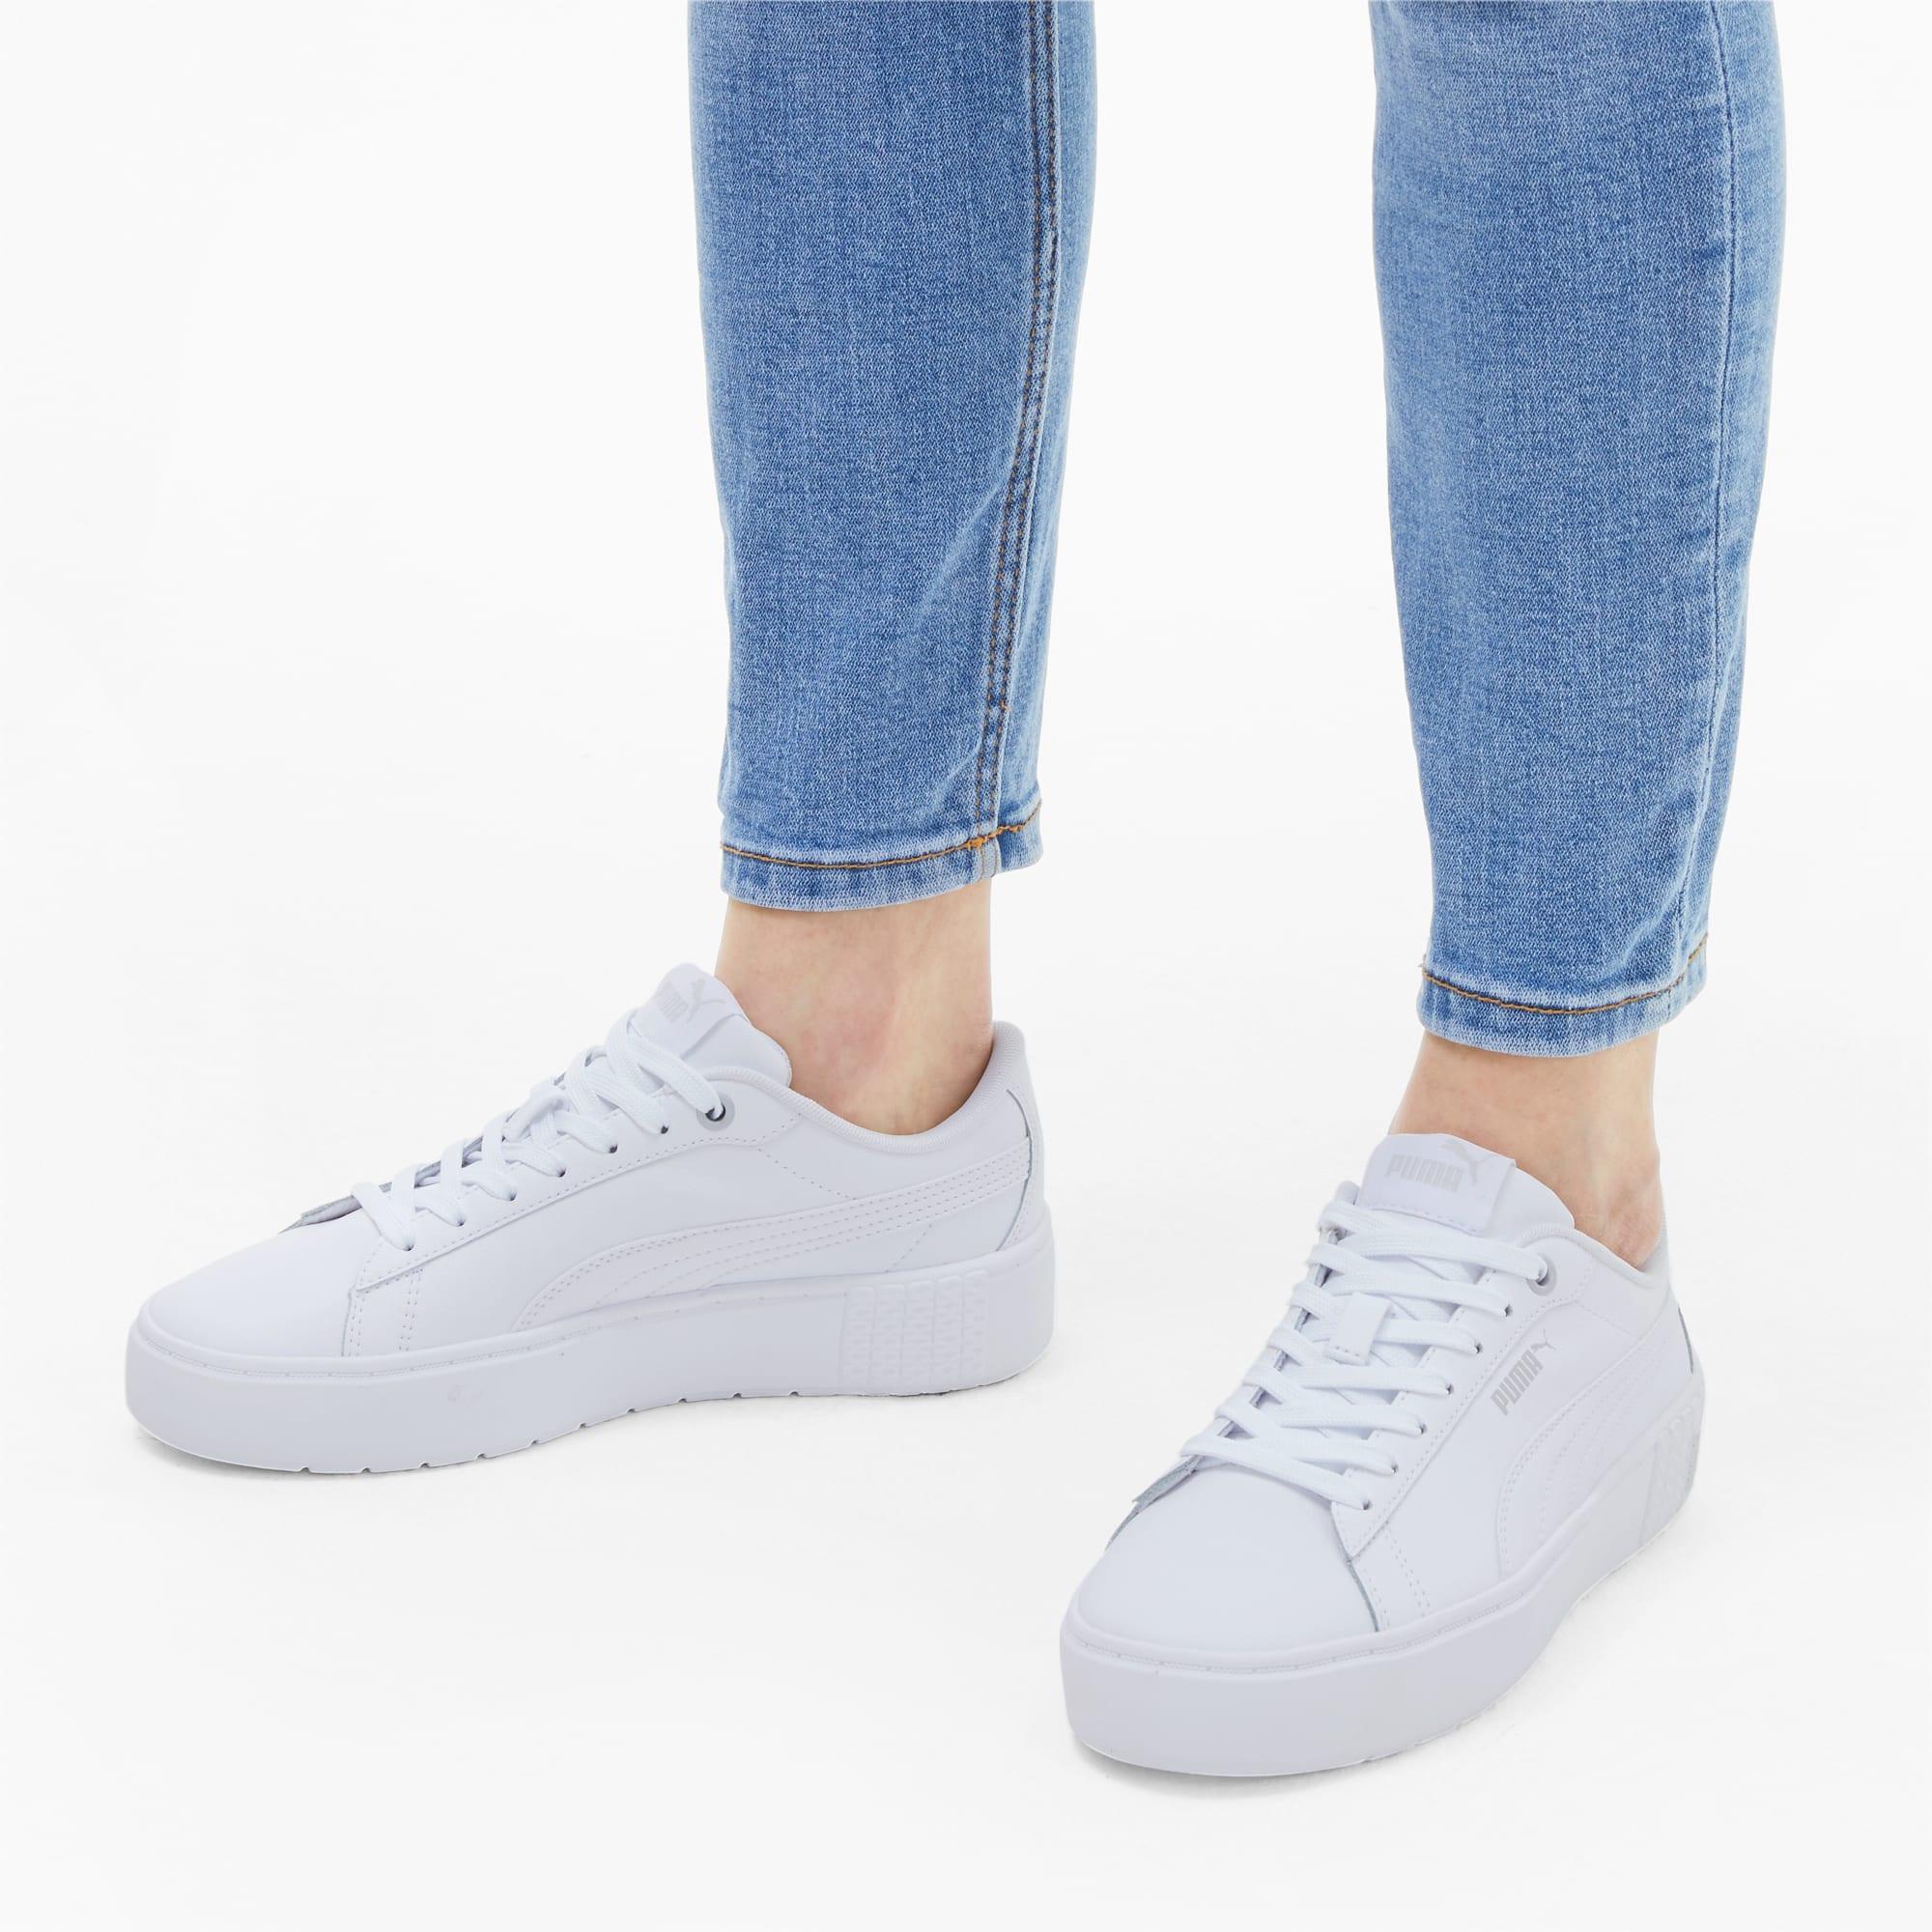 PUMA Synthetic Smash Platform V2 Sneakers in White - Lyst